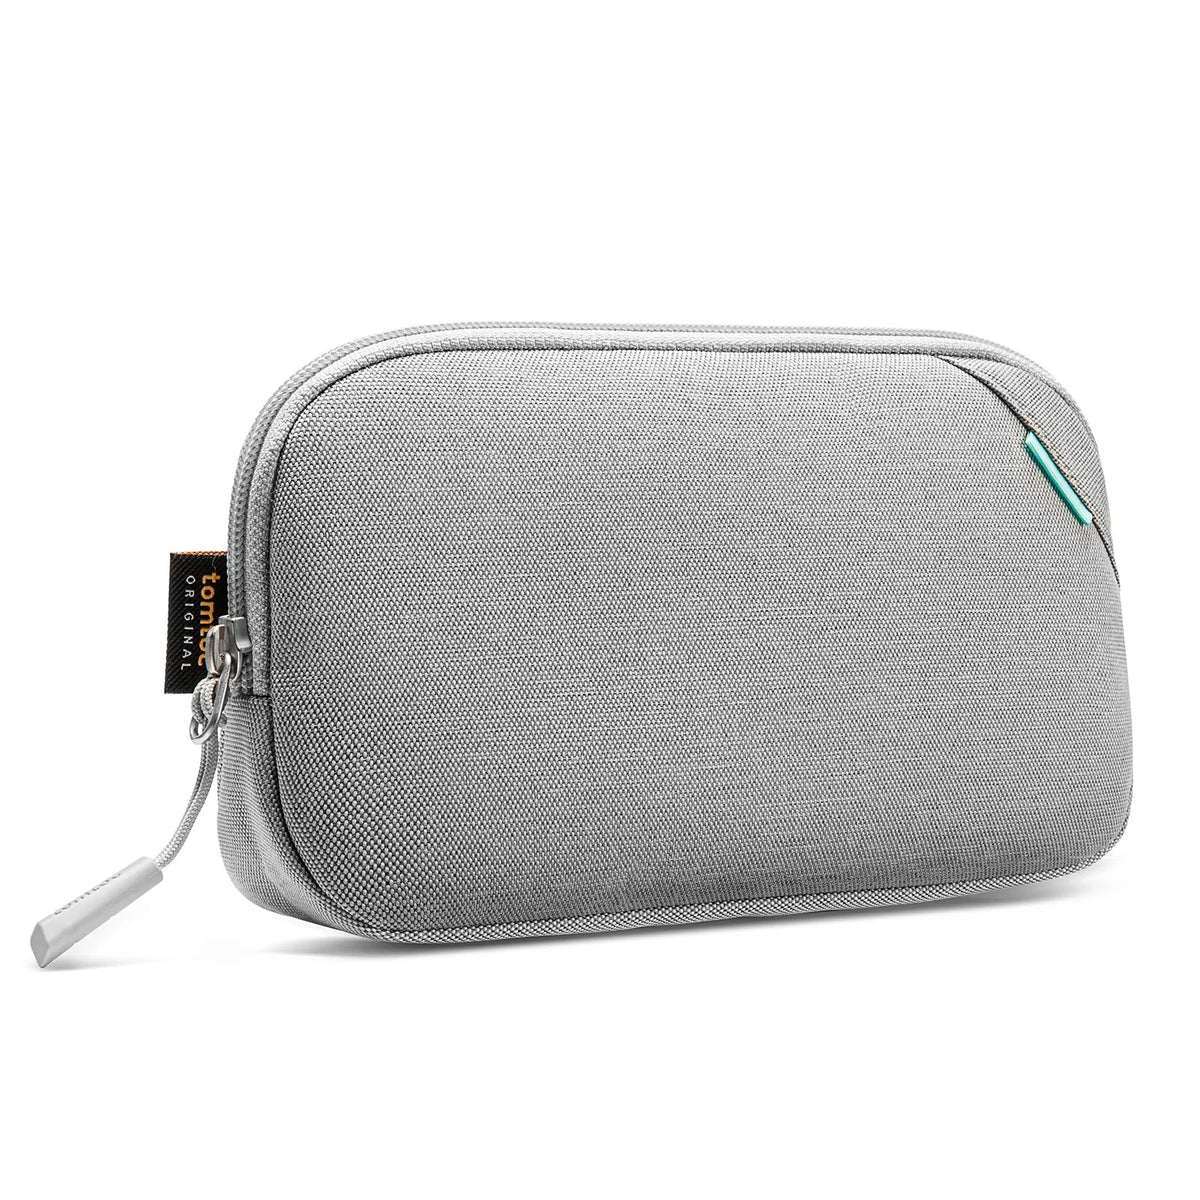 tomtoc Recycled Portable Water-Resistant Storage Bag / Tech Pouch - Gray